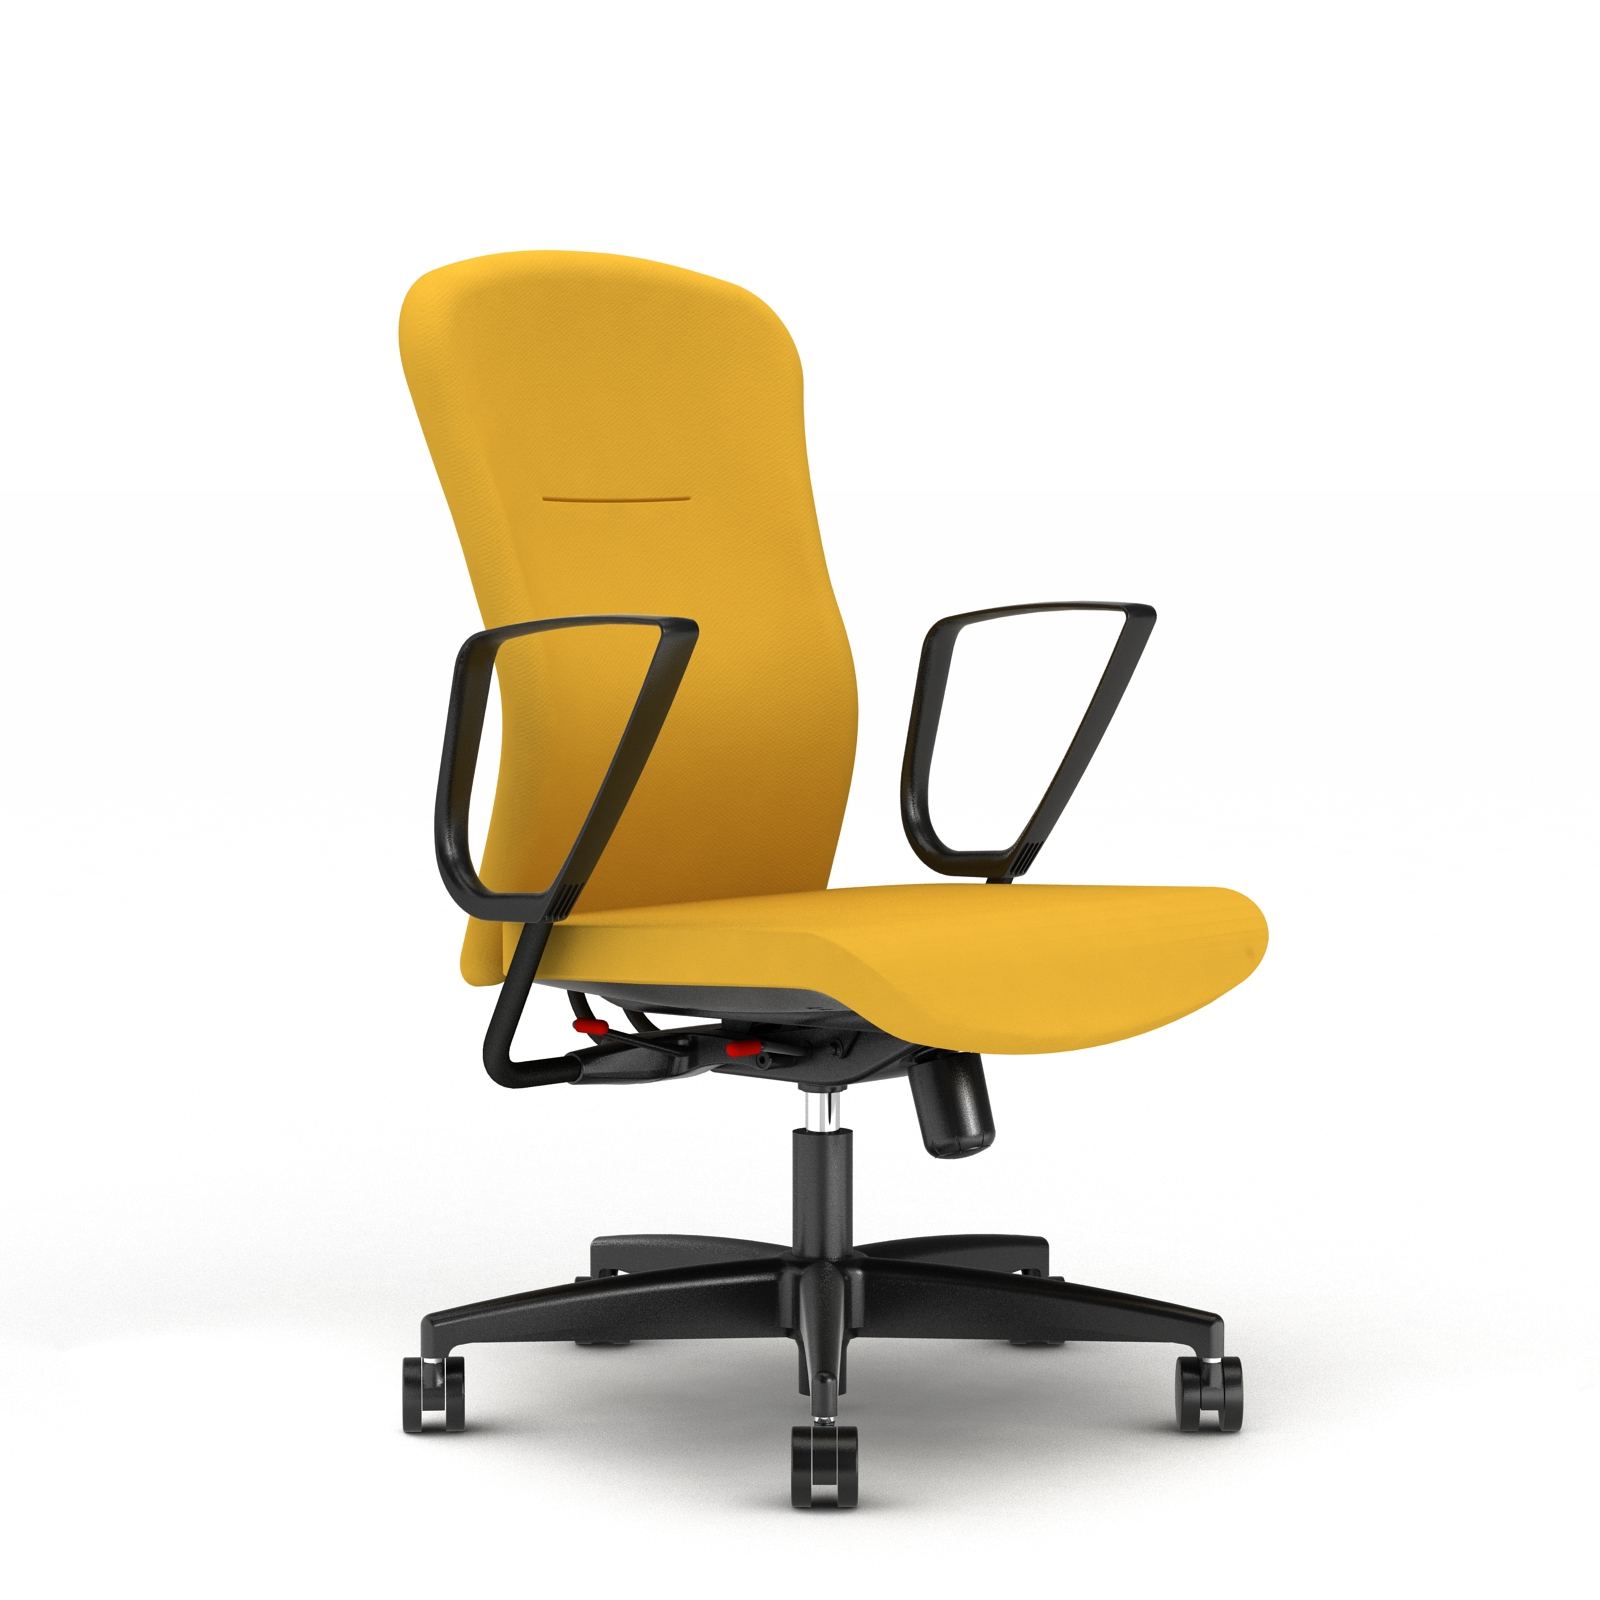 Team chair in yellow fabrics and 2013 mechanism